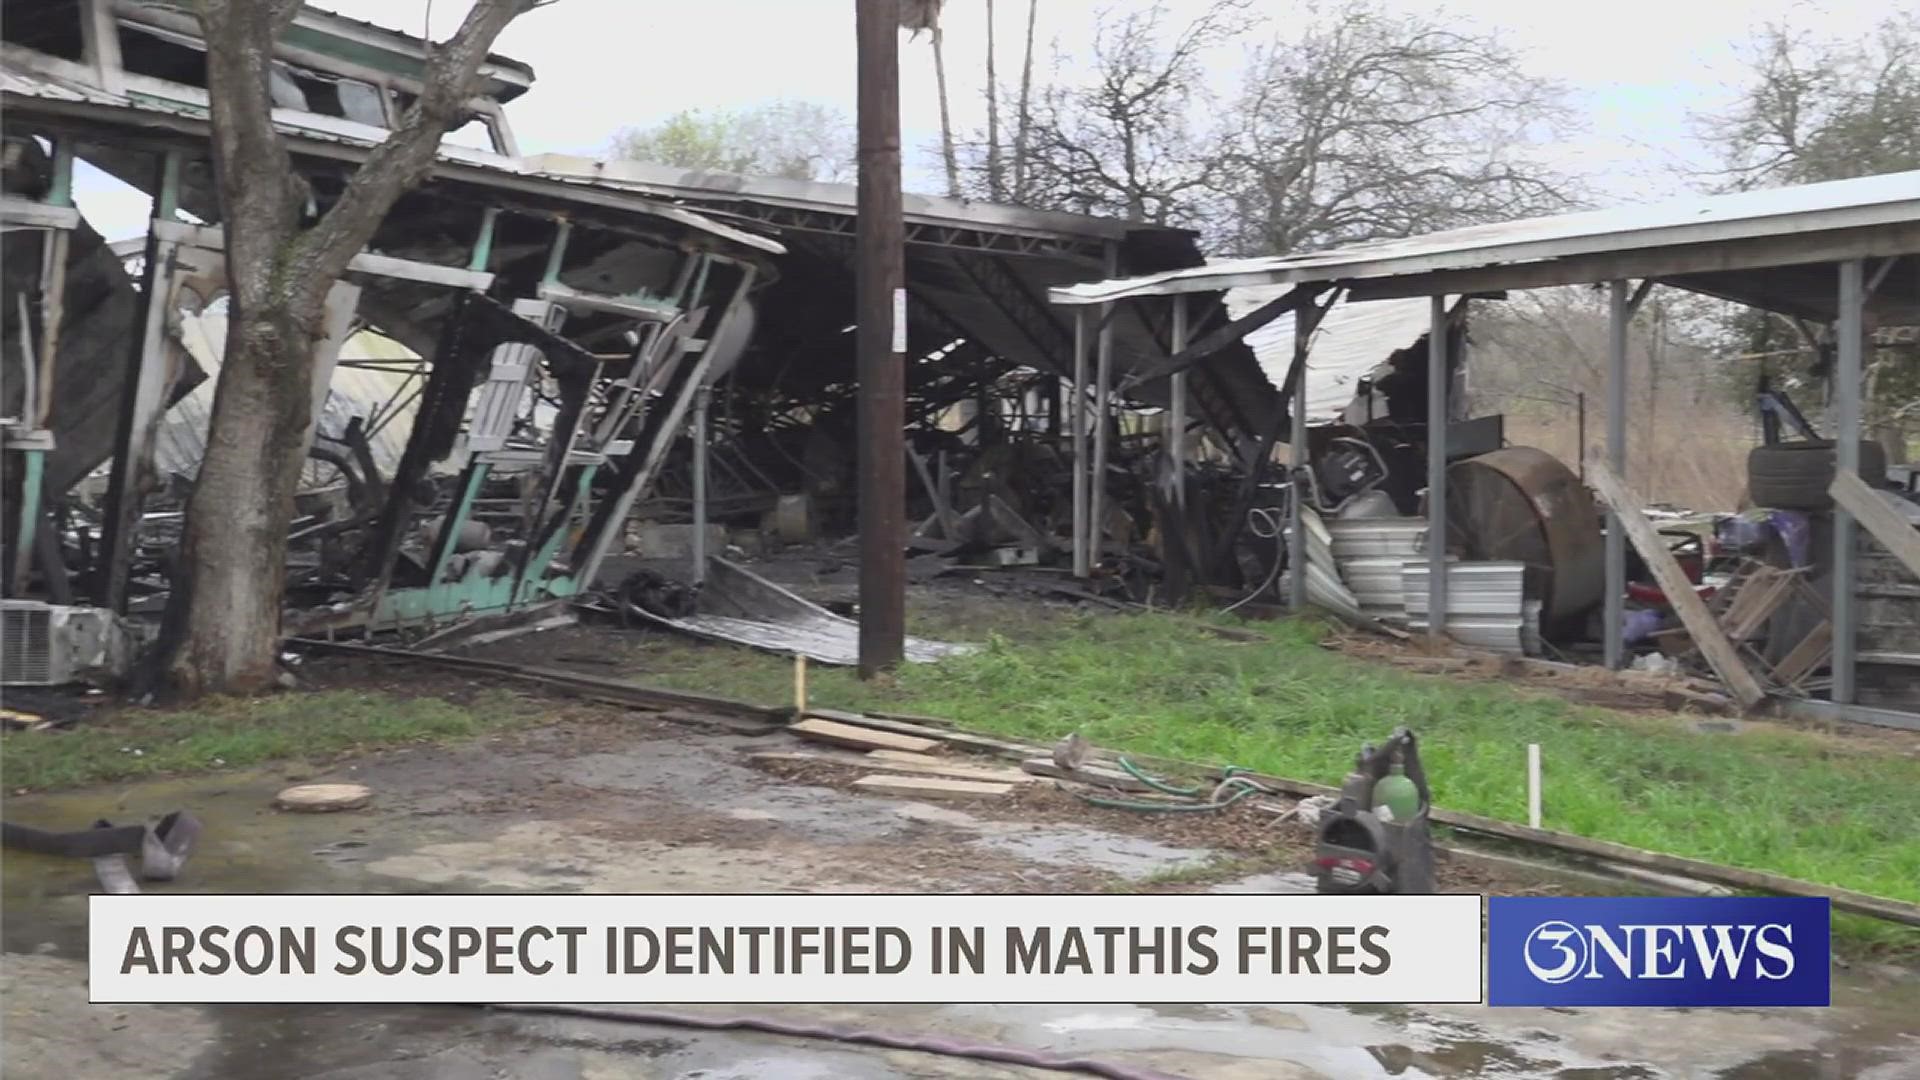 Mathis Volunteer Fire Department Chief Adrian Ramirez said mutual aid was required to get the fire under control.